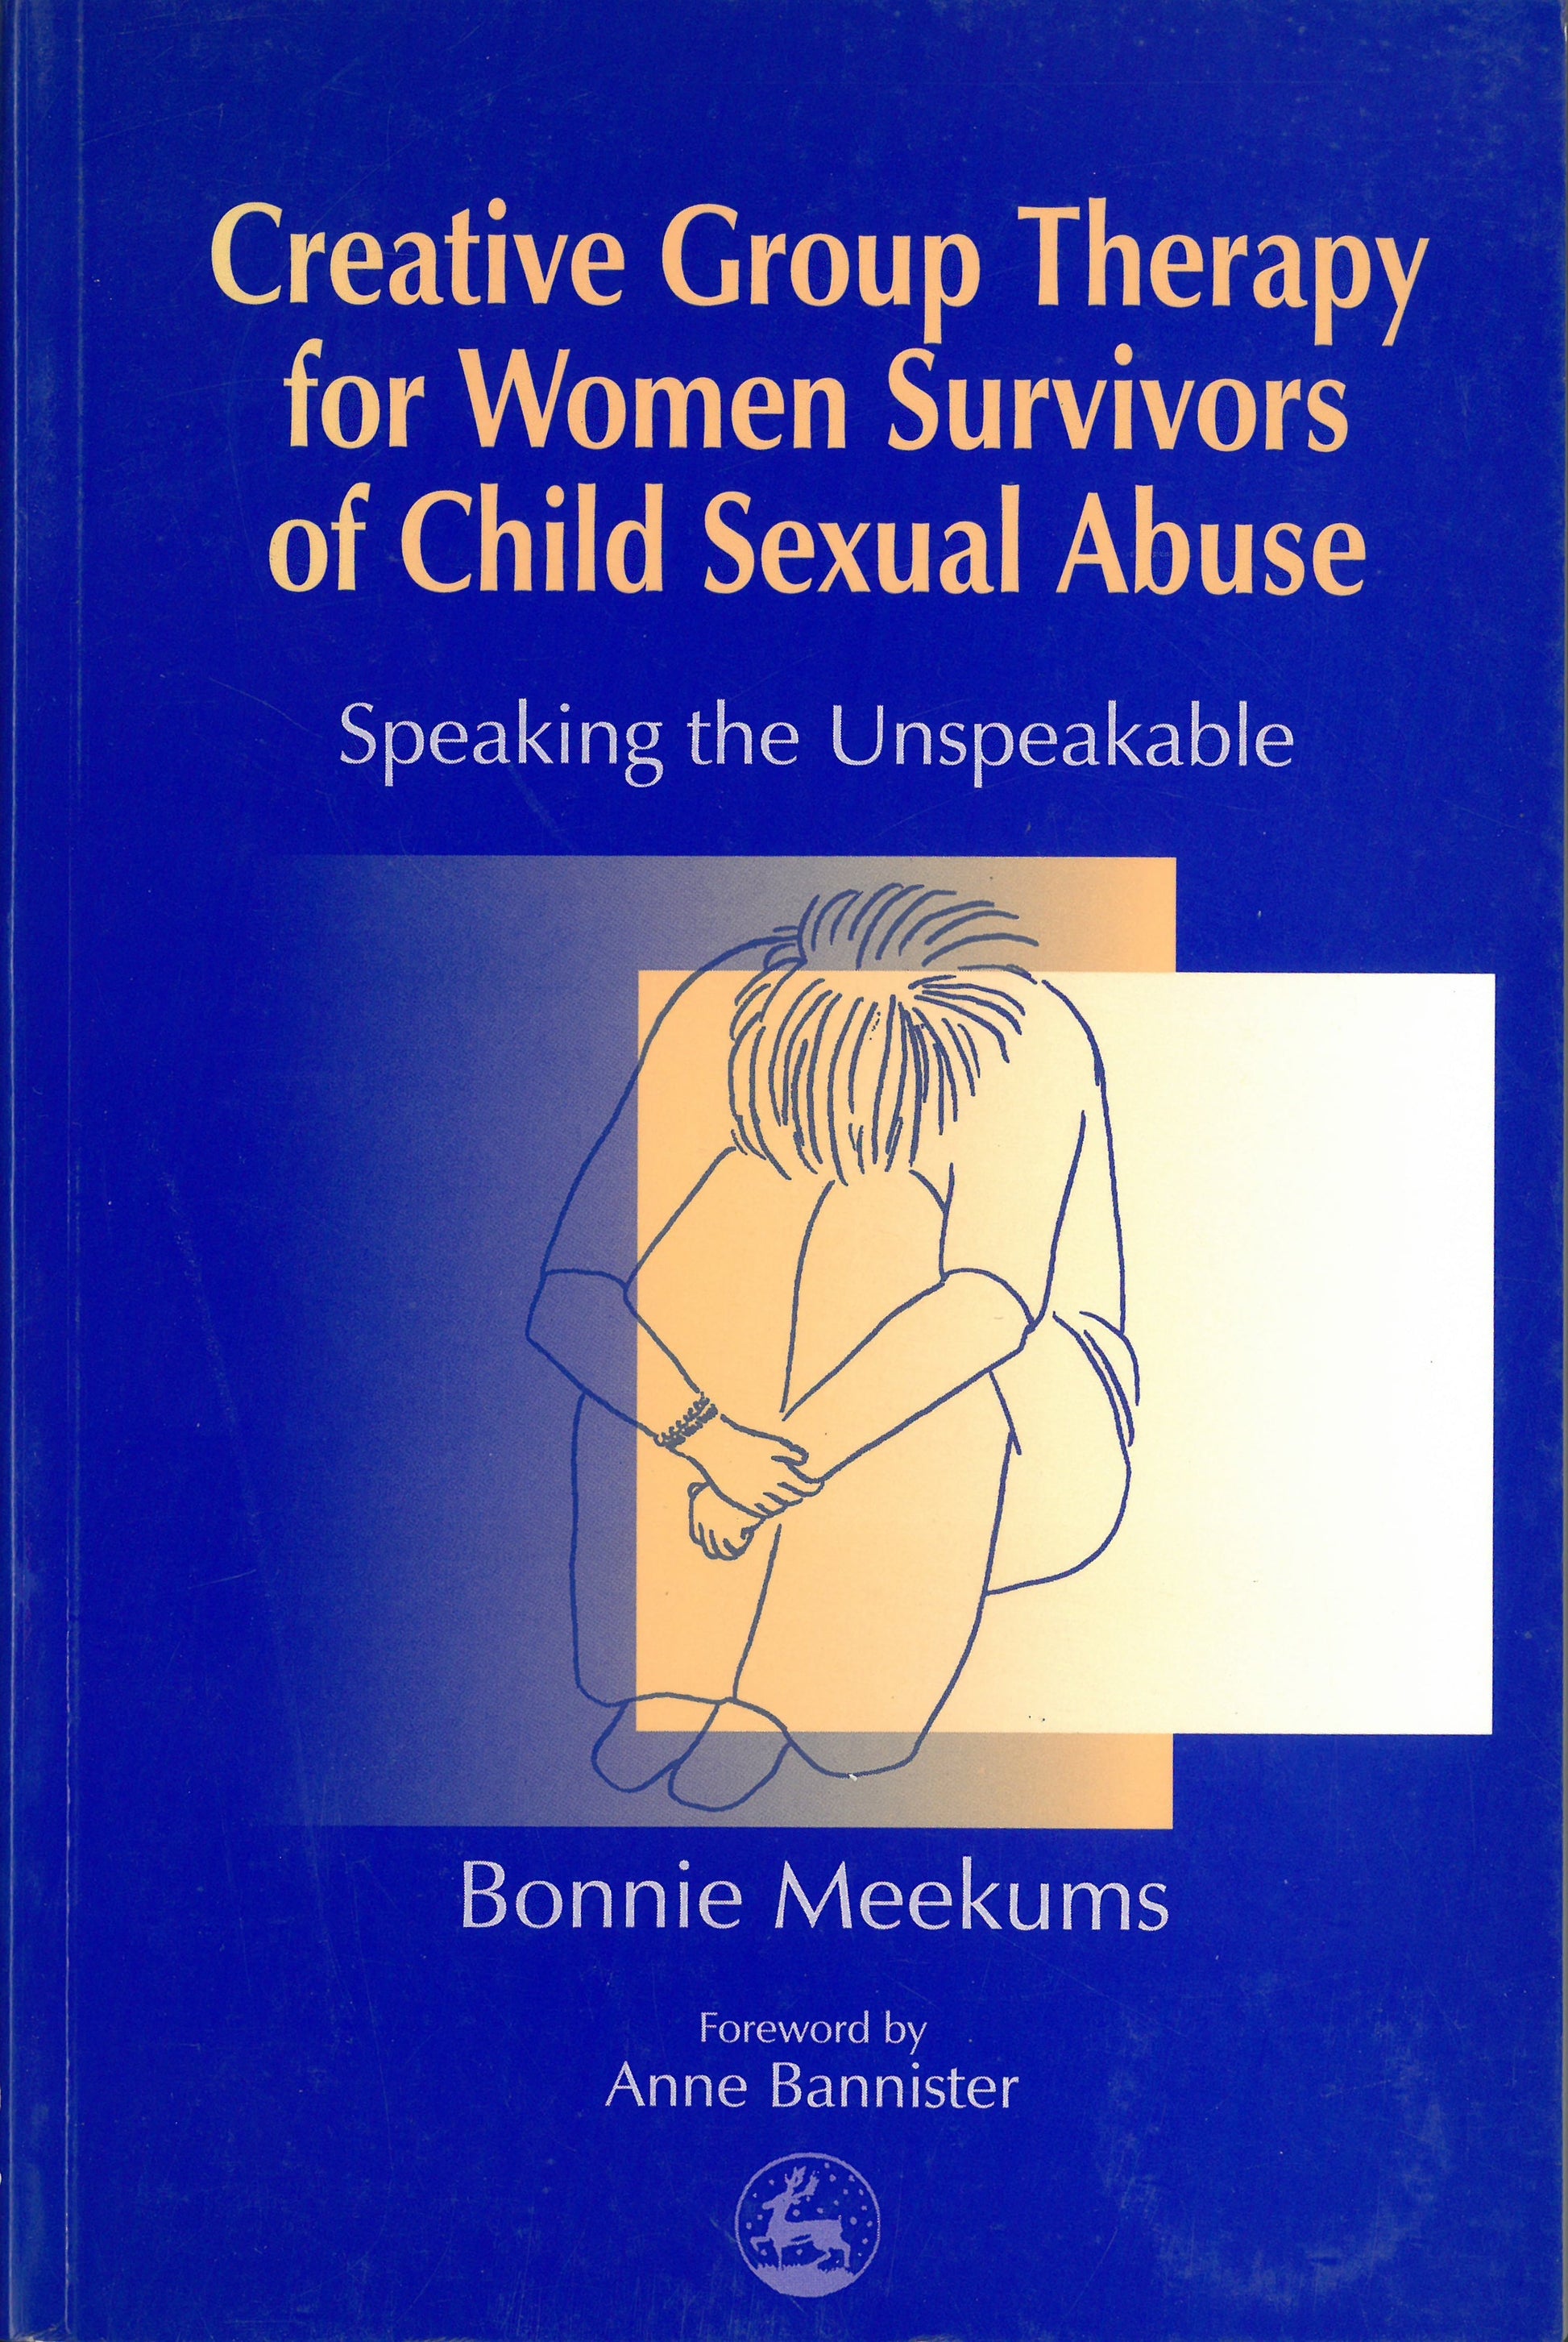 Creative Group Therapy for Women Survivors of Child Sexual Abuse by Bonnie Meekums, Anne Bannister